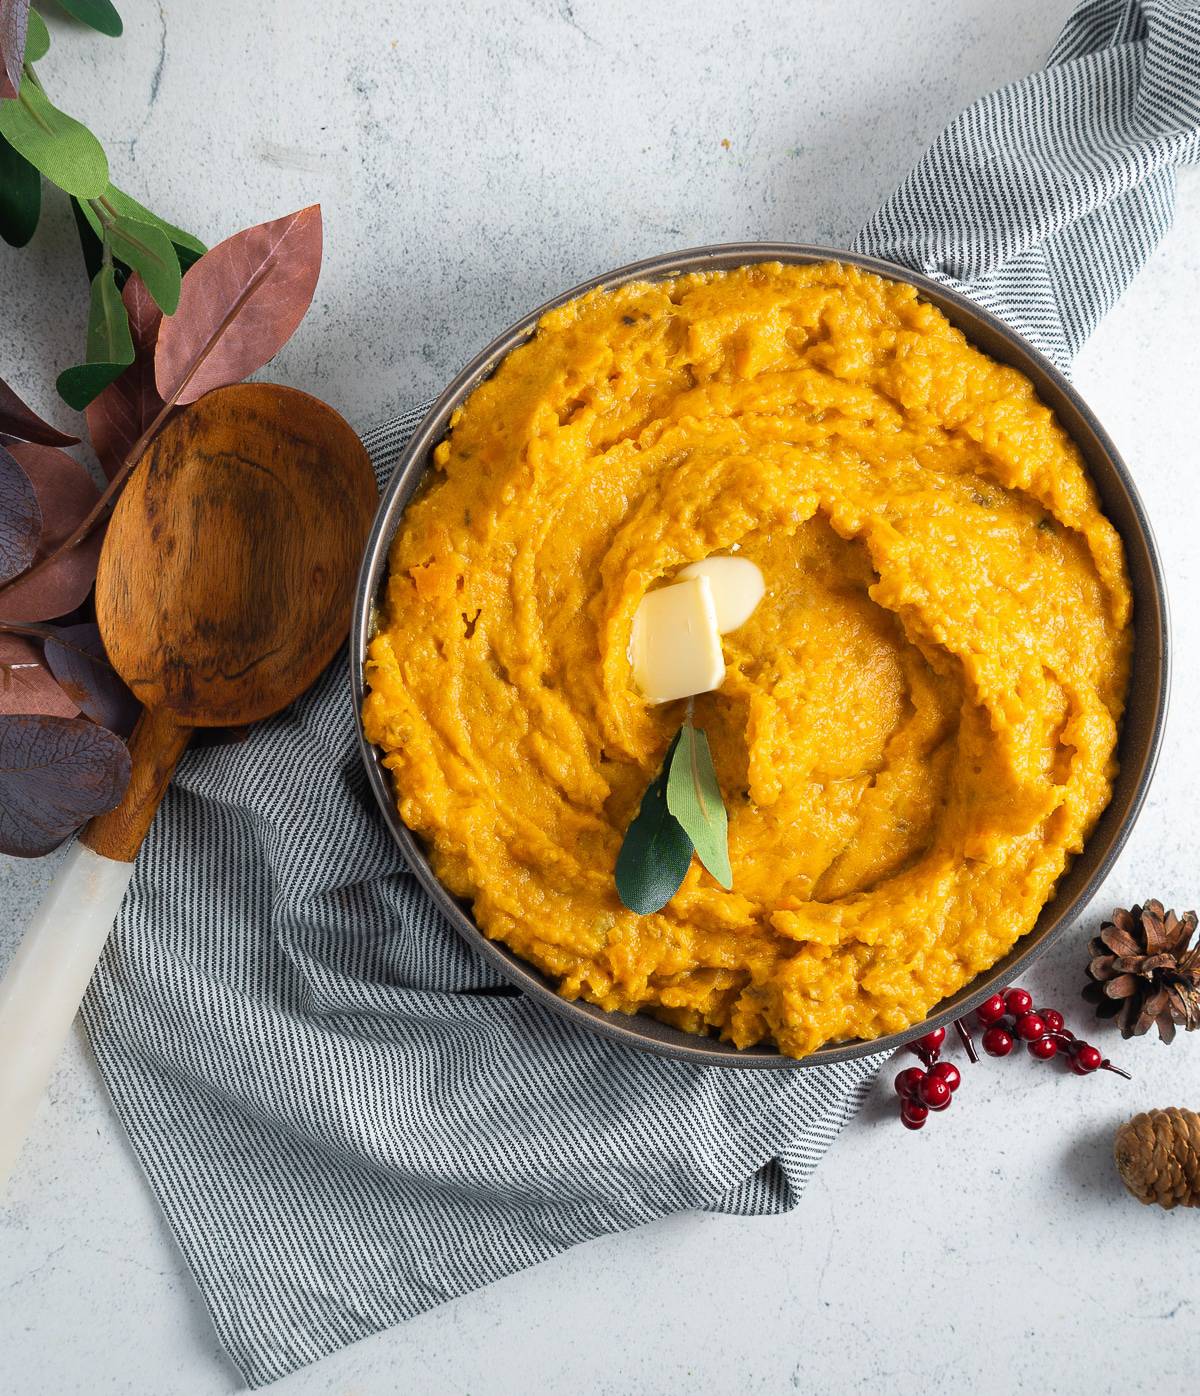 Bob evans style sweet potatoes in a bowl with butter, a serving spoon, and fall-style decor